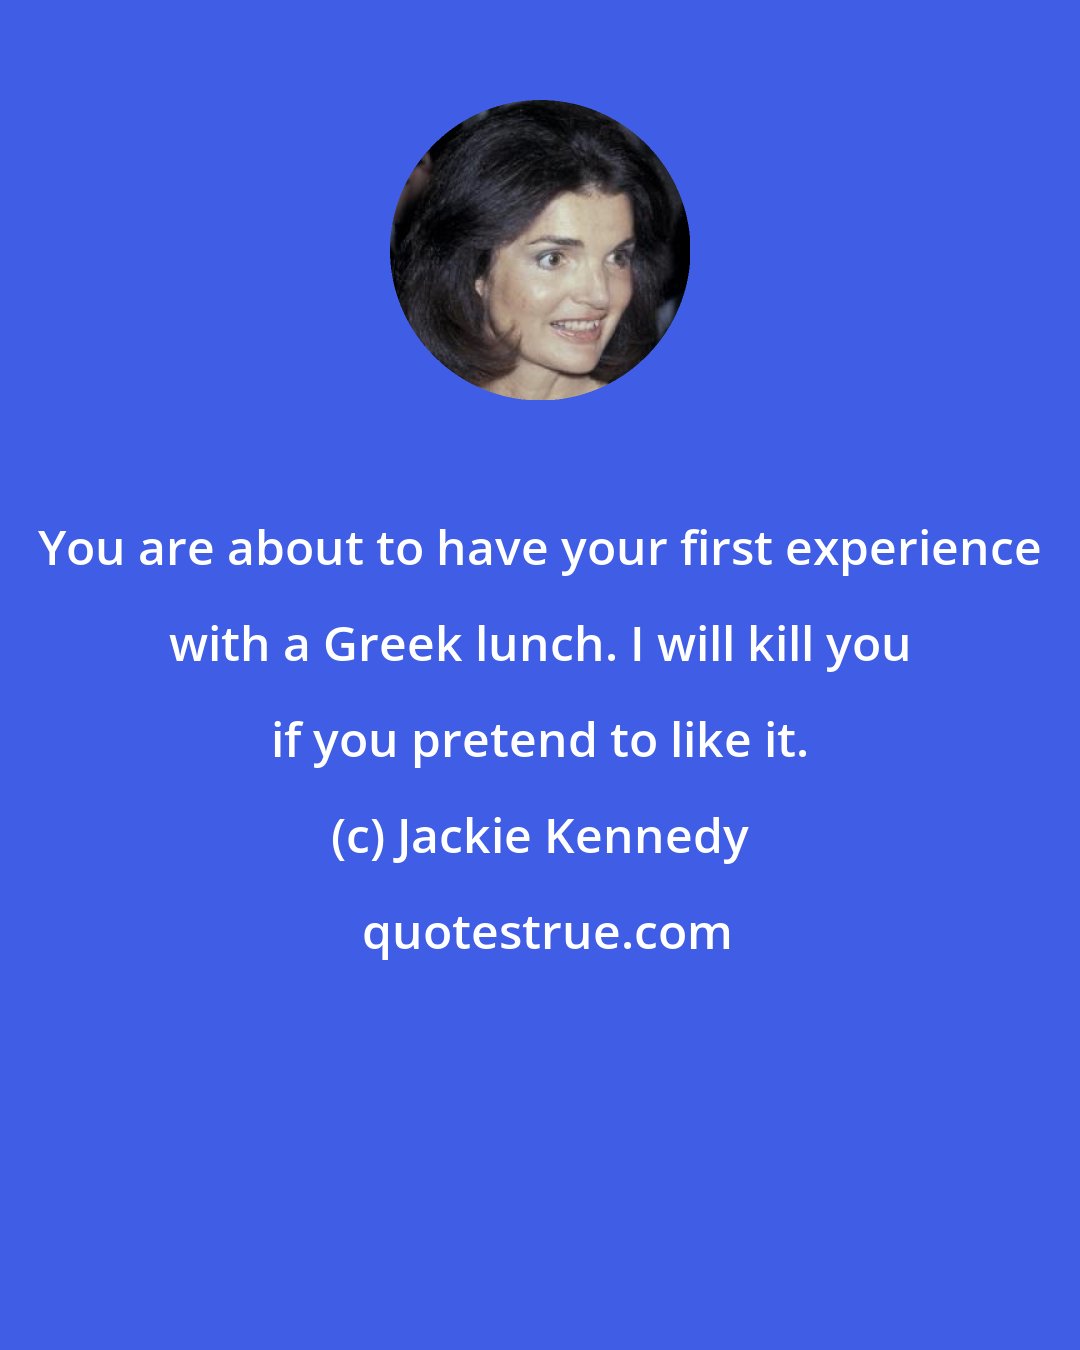 Jackie Kennedy: You are about to have your first experience with a Greek lunch. I will kill you if you pretend to like it.